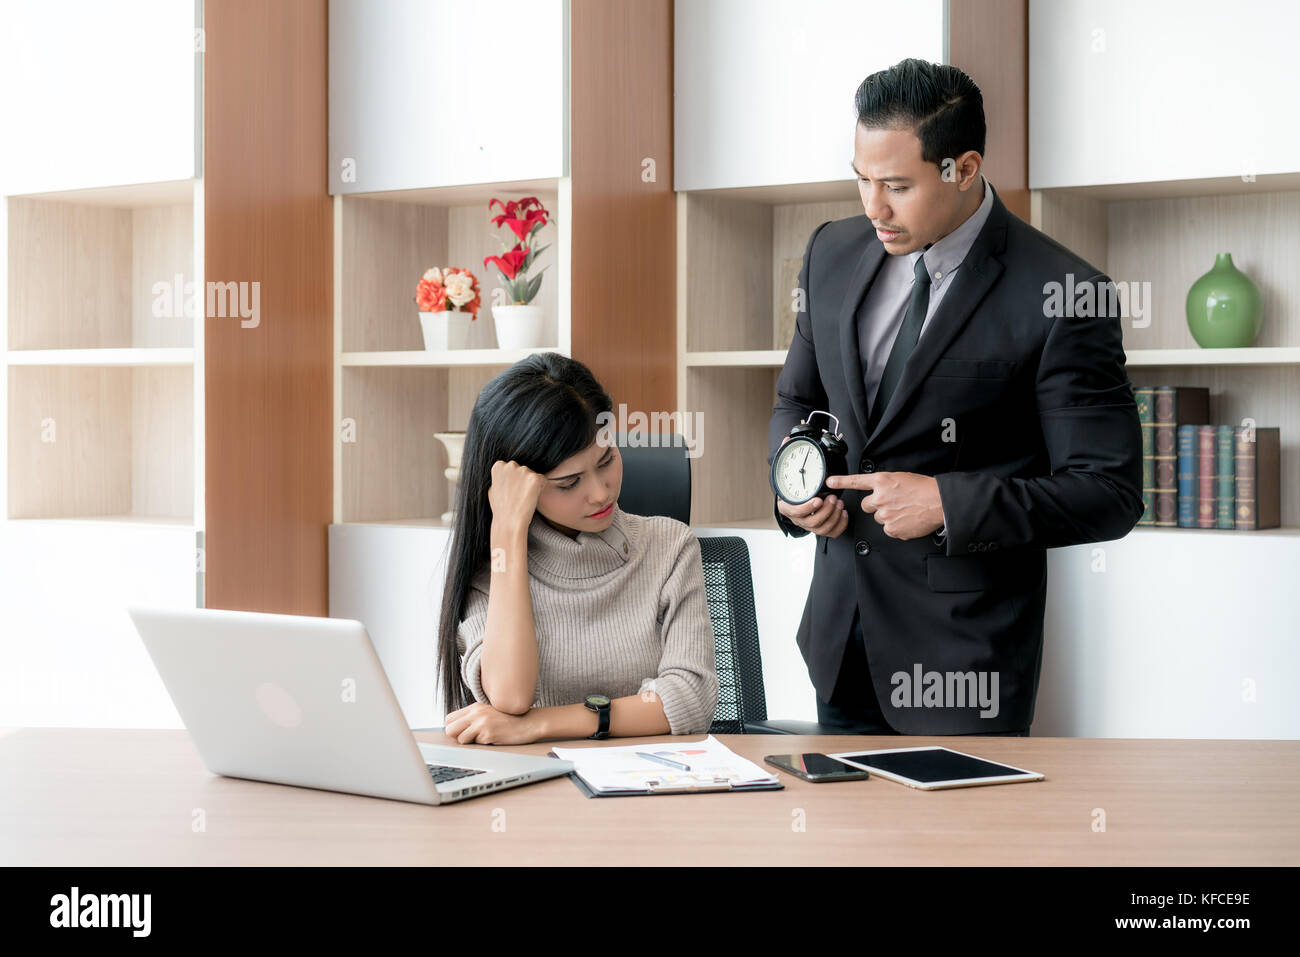 Angry business manager pointing his watch to subordinate businesswoman working missed deadline. Boss and worker at work having conflict. Stock Photo